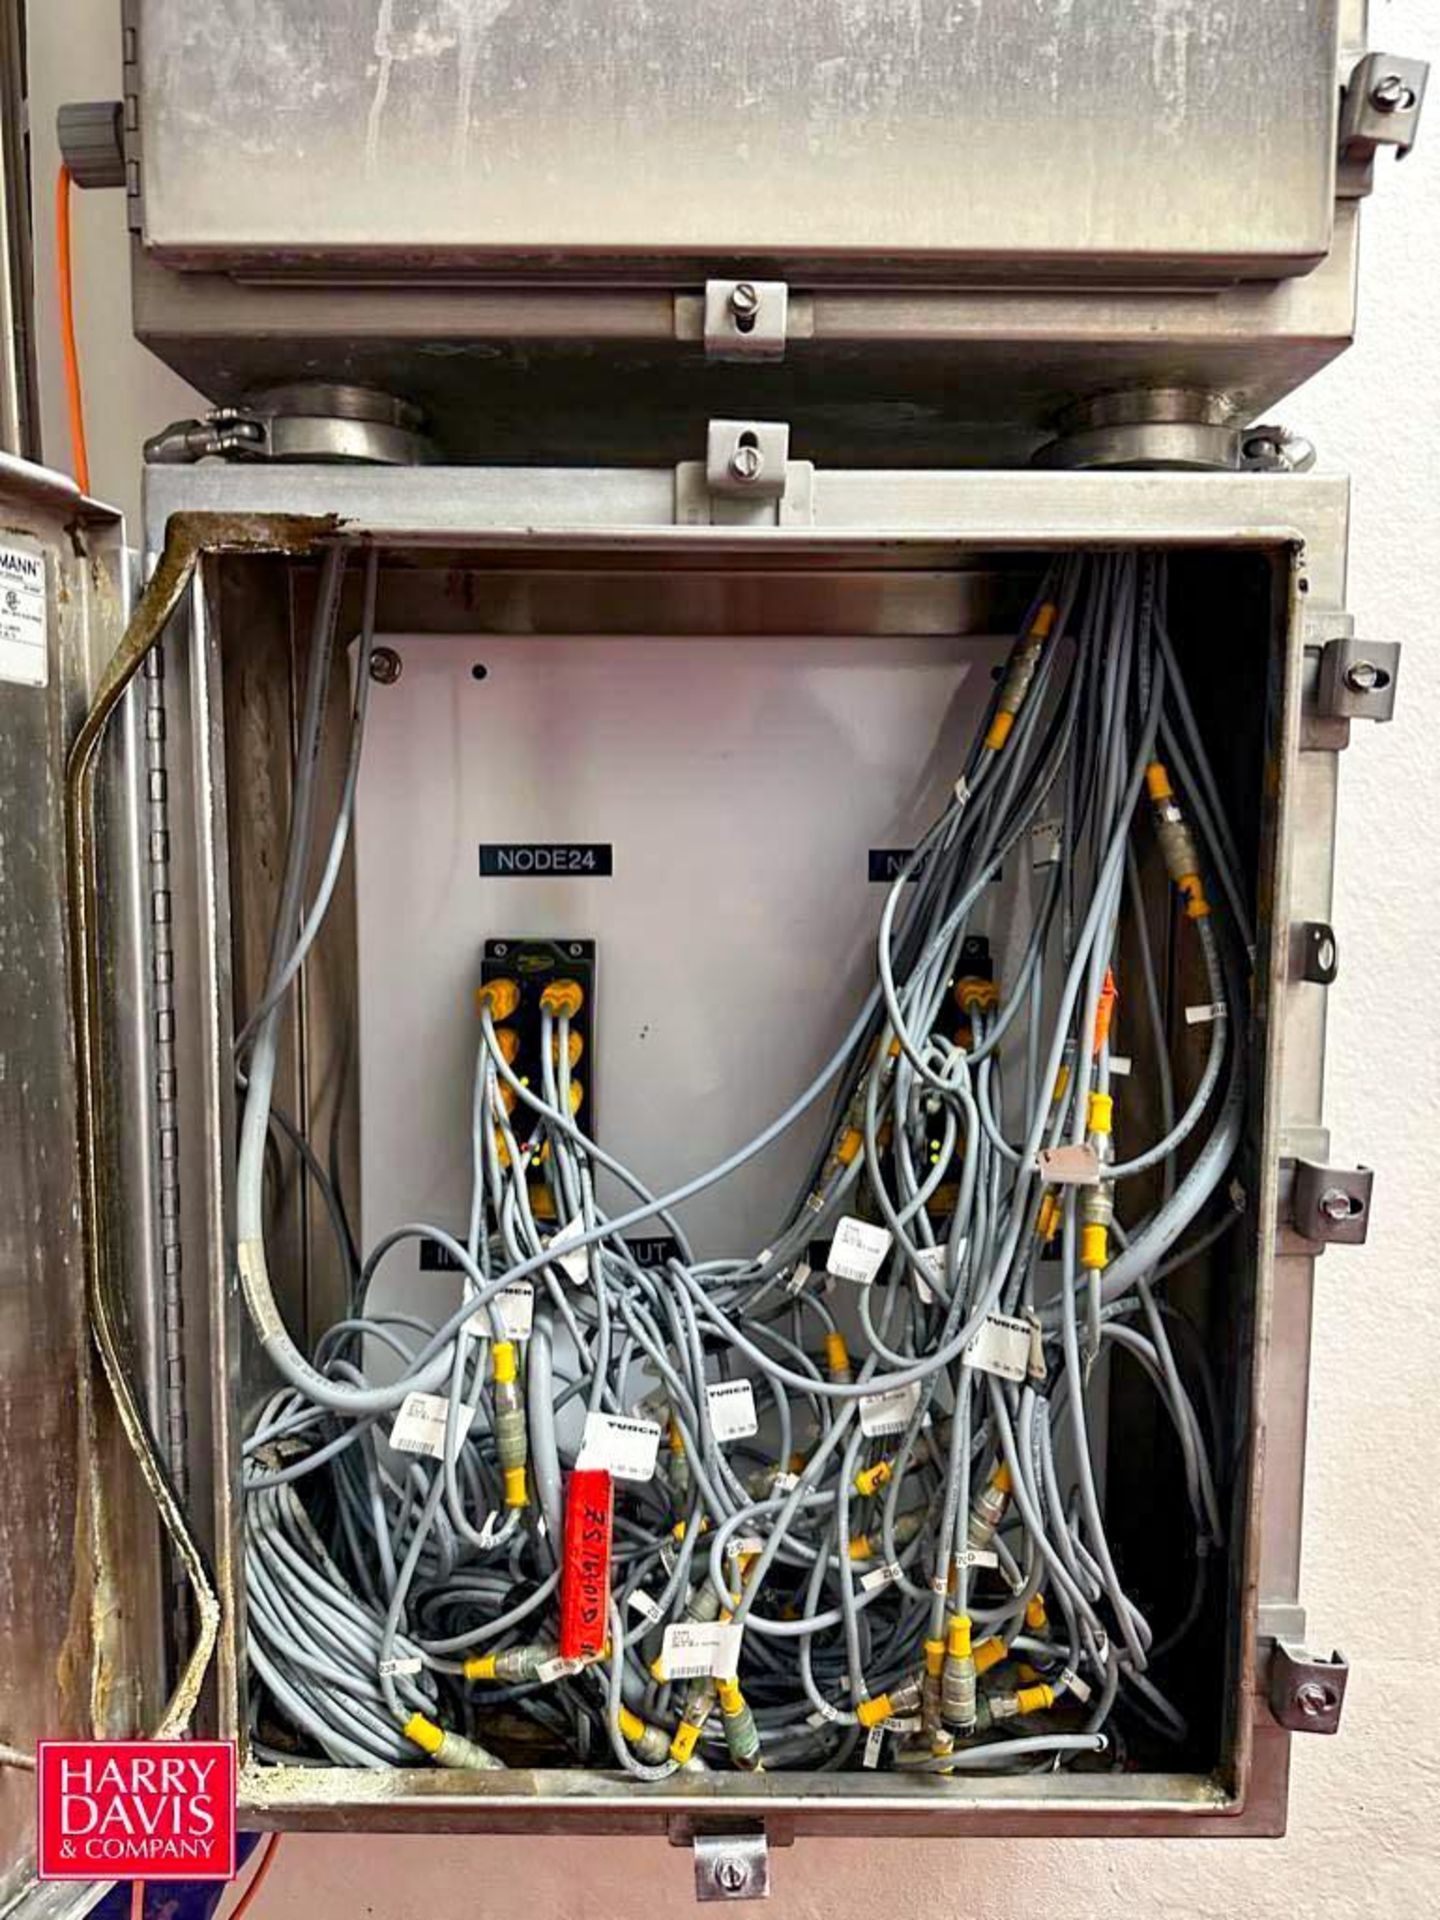 Communication Cable S/S Junction Panels - Rigging Fee: $200 - Image 2 of 4